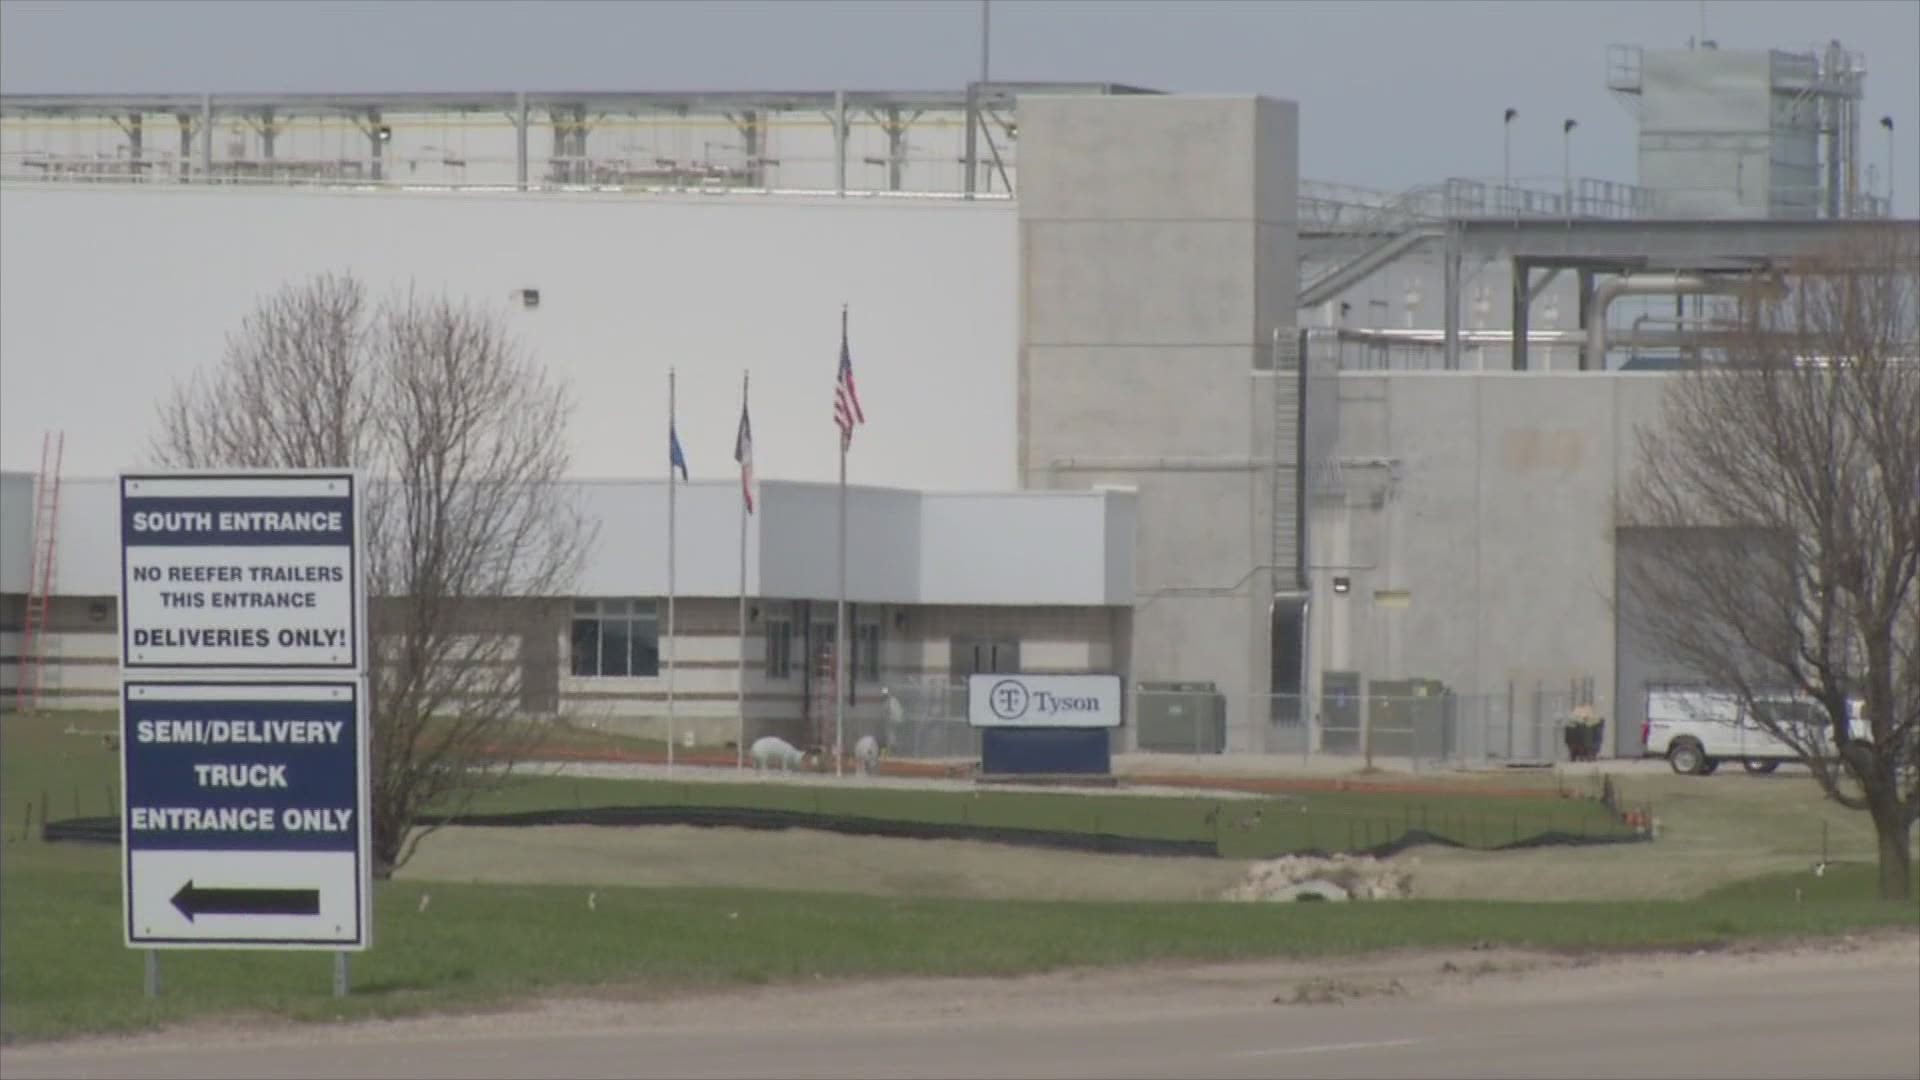 With pressure growing to take action, Tyson Foods announced Sunday that they would shut down their Perry plant for a day to deep clean the facilities.